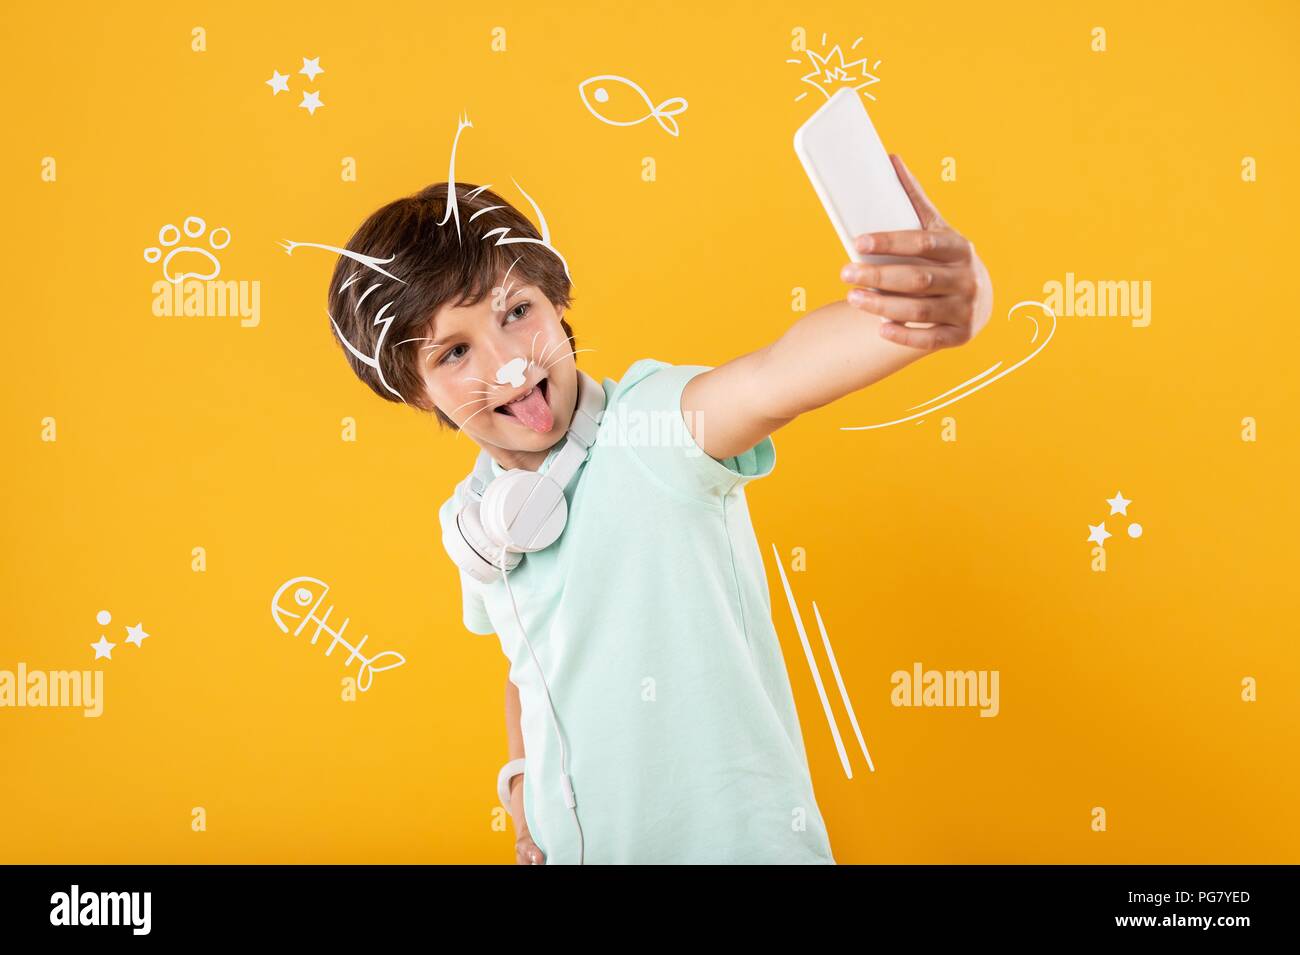 Positive boy making silly faces while taking a selfie Stock Photo